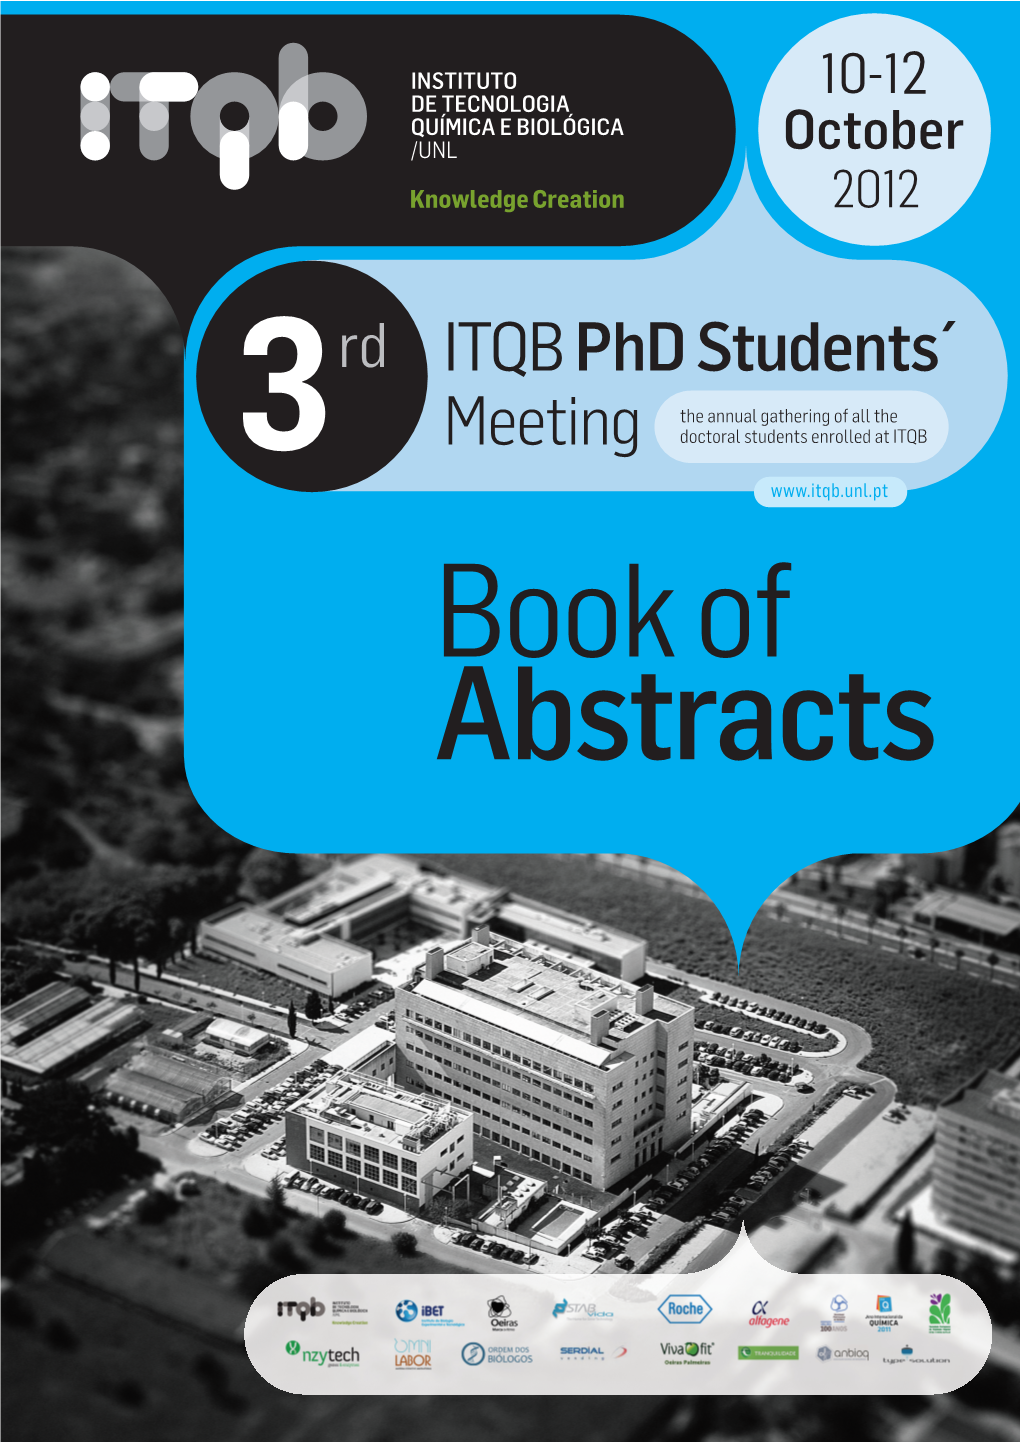 ITQB Phd Students´ Meeting the Annual Gathering of All